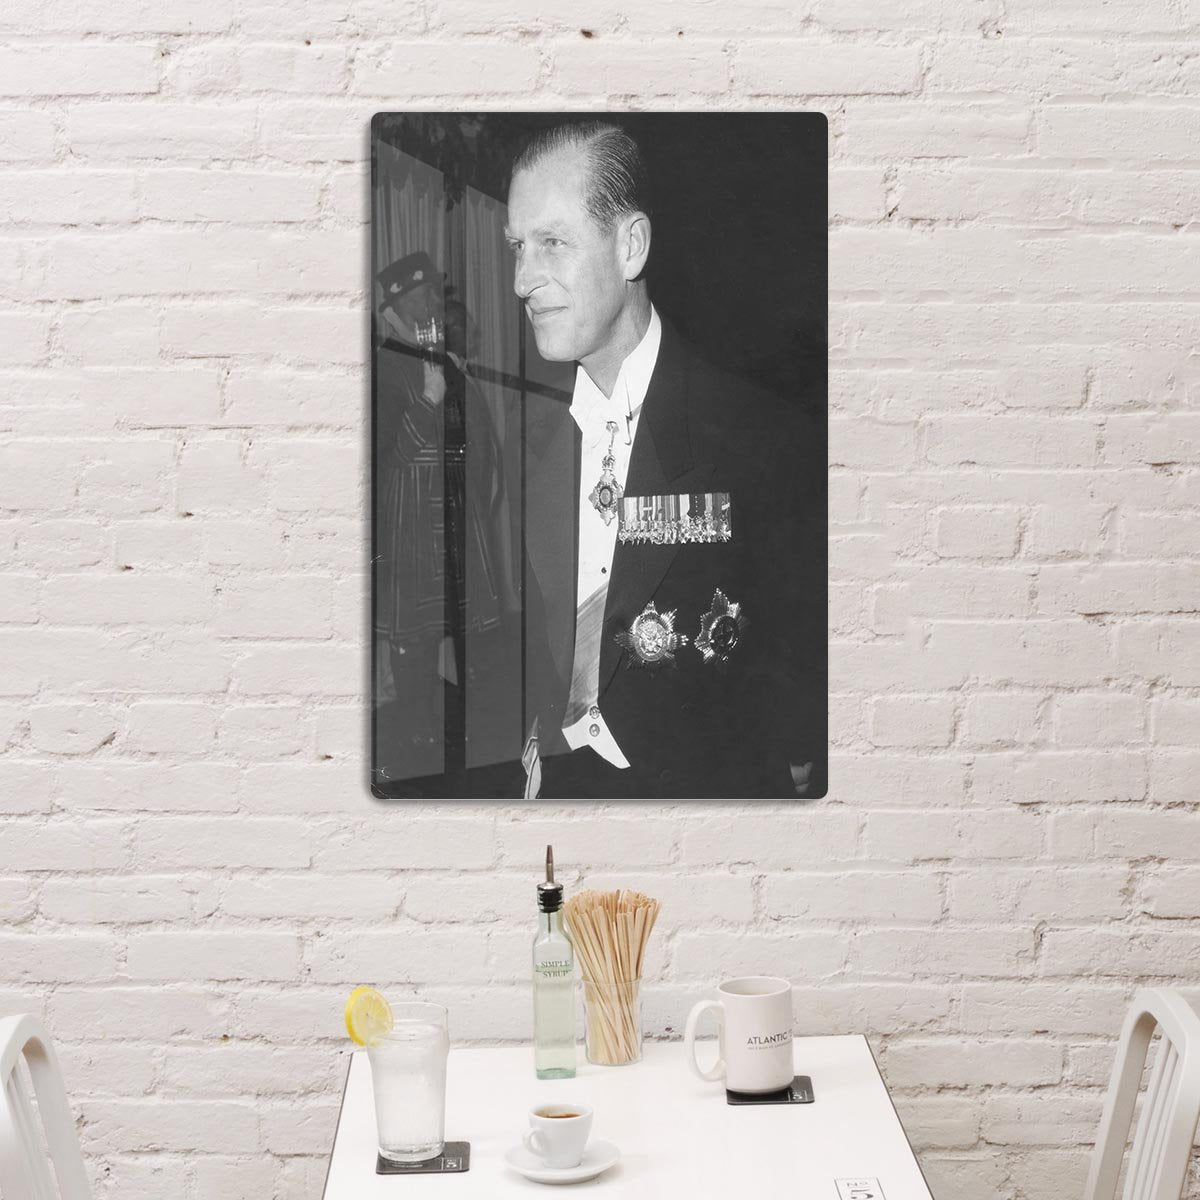 Prince Philip attending the opera at Covent Garden HD Metal Print